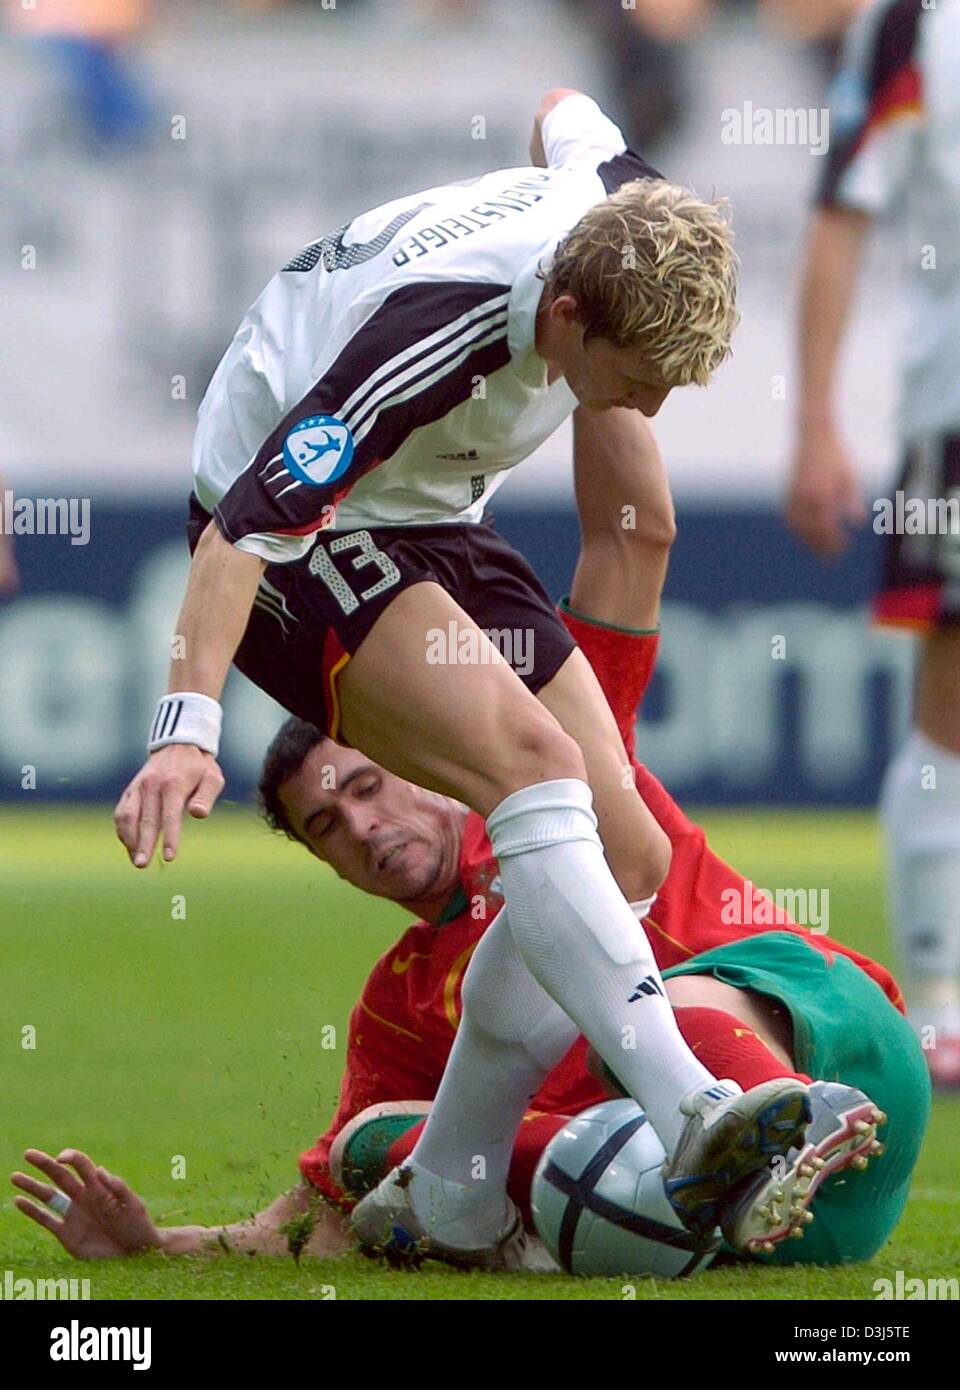 (dpa) - Germany's Bastian Schweinsteiger (front) fights for the ball with Portugal's Hugo Almeida. The Portuguese under 21 national soccer team beat the German under 21 squad with a score of 2-1 at the Bruchweg stadium in Mainz, Germany, 2 June 2004. With the victory Portugal moves into the next round of the under 21 European Championship while host Germany is eliminated. Stock Photo